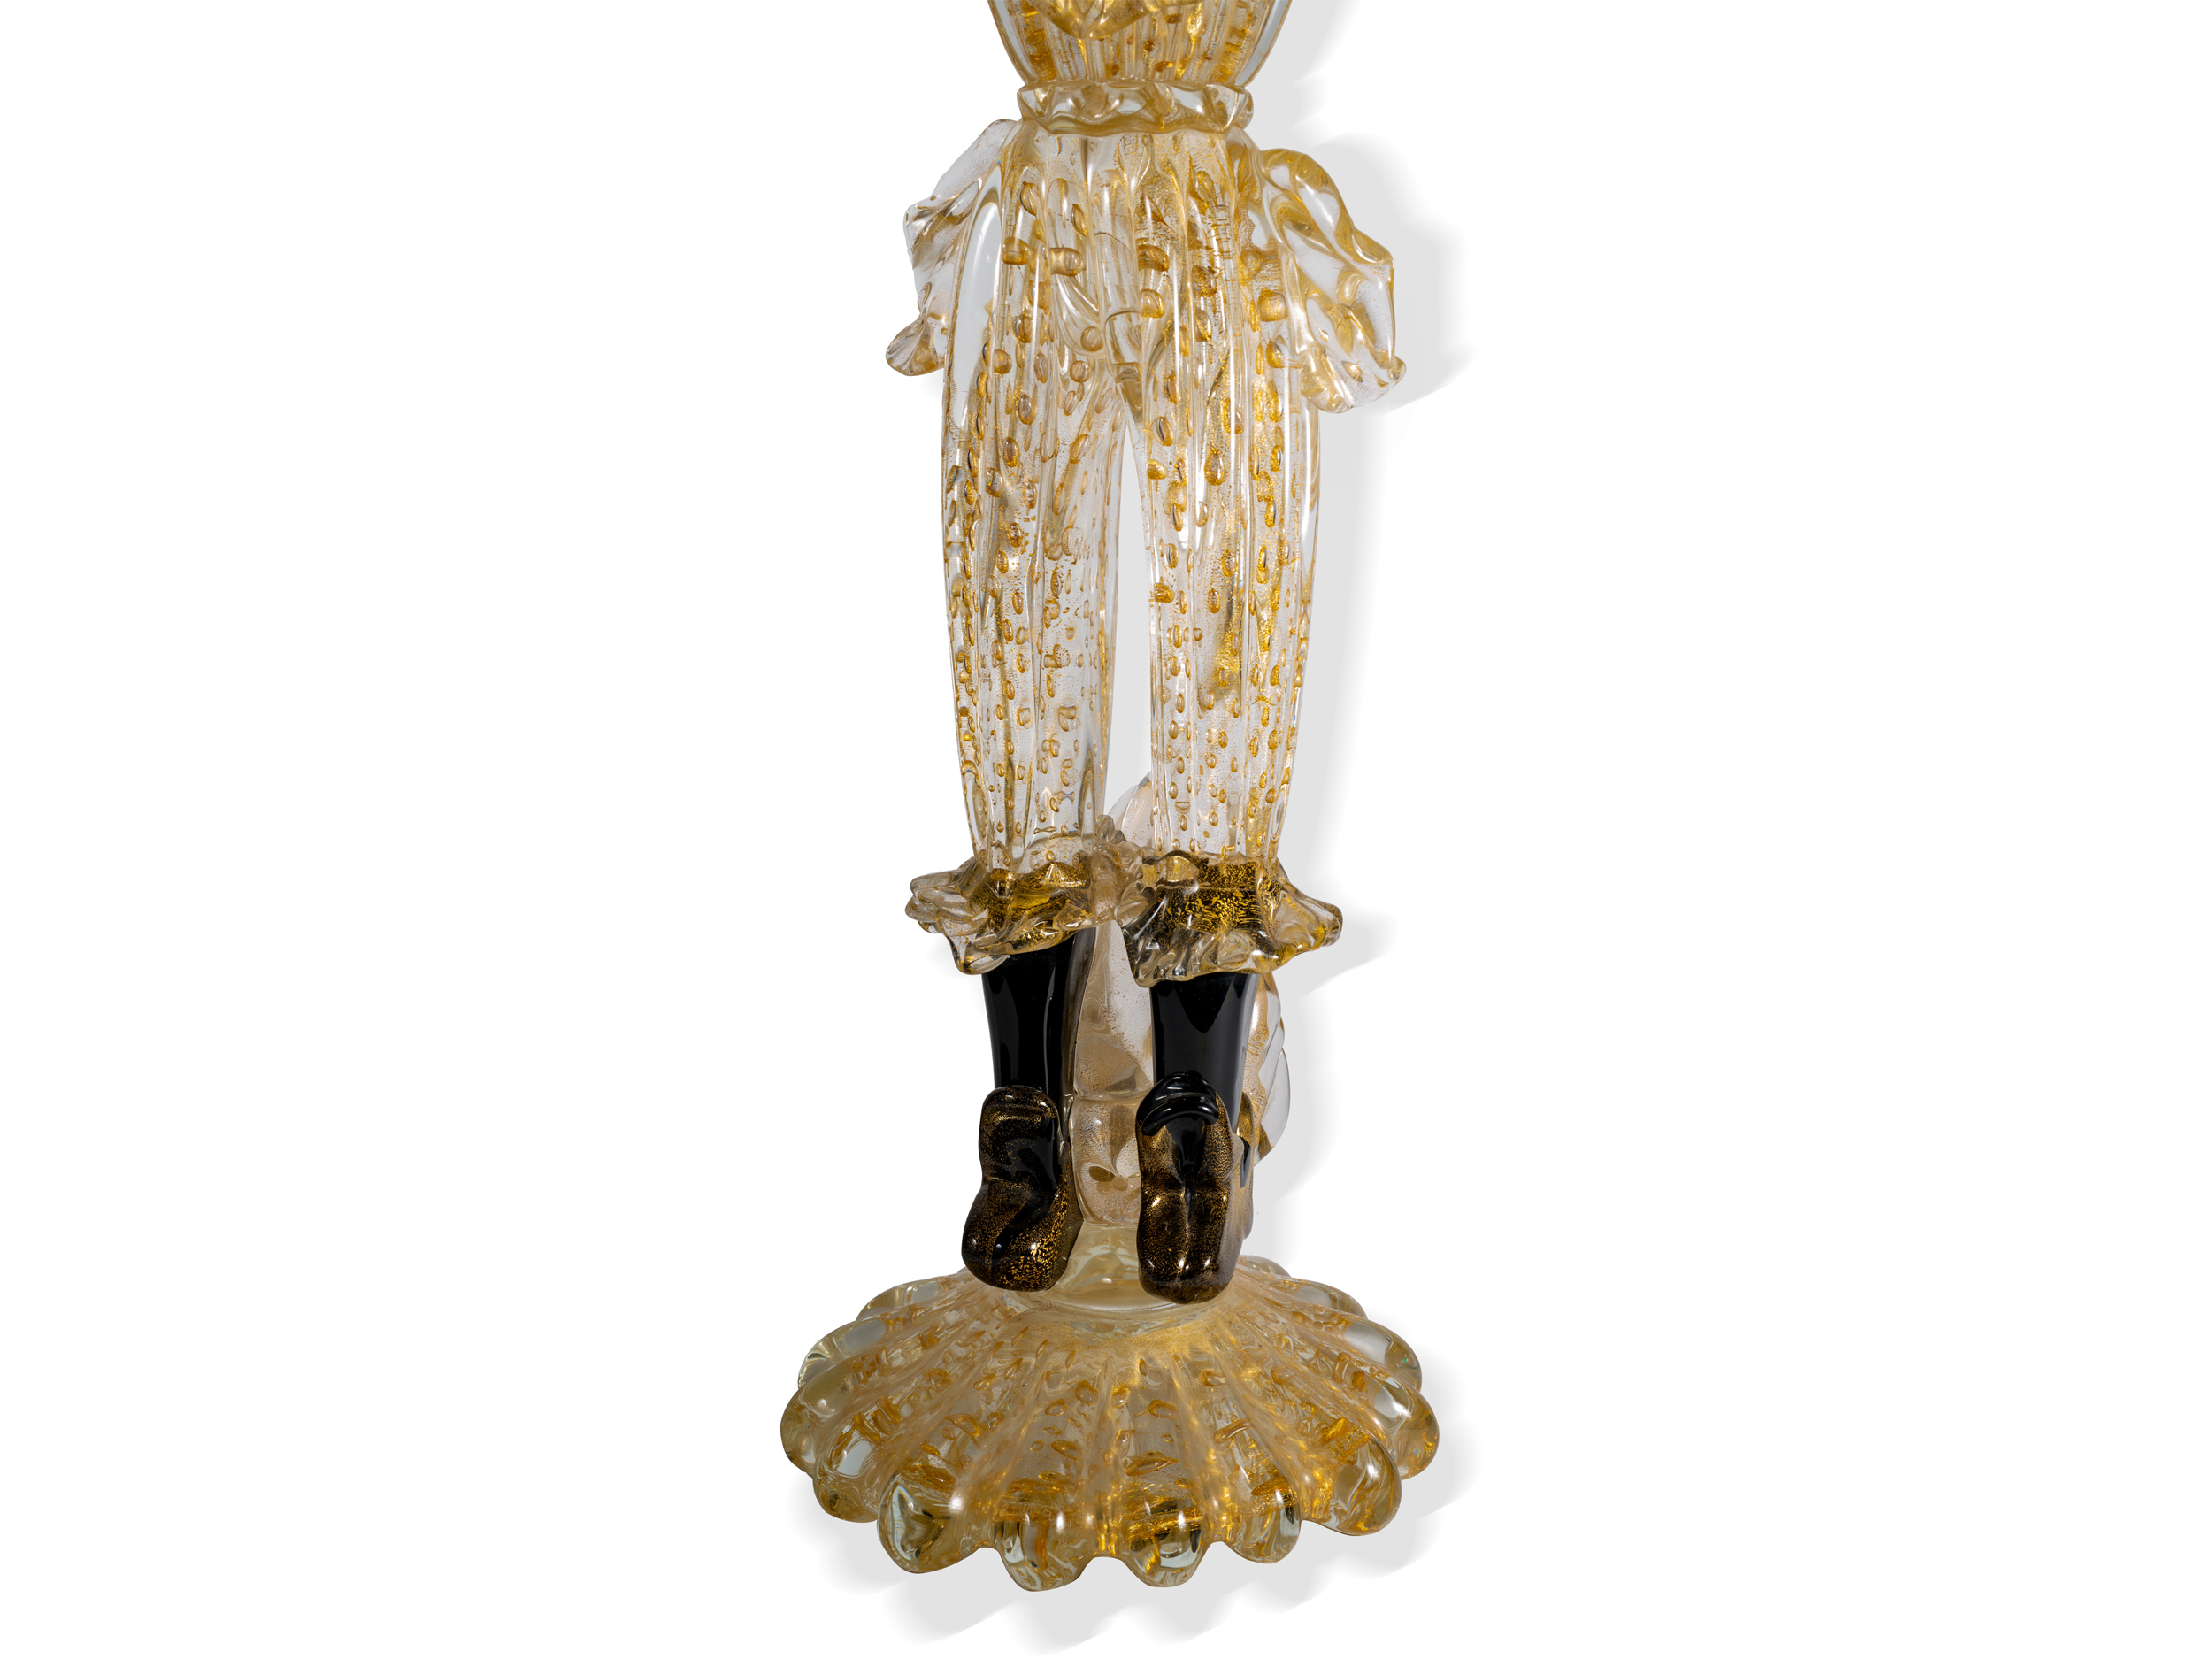 Baroviere & Toso, attributed, Pair of candlesticks - Image 8 of 11